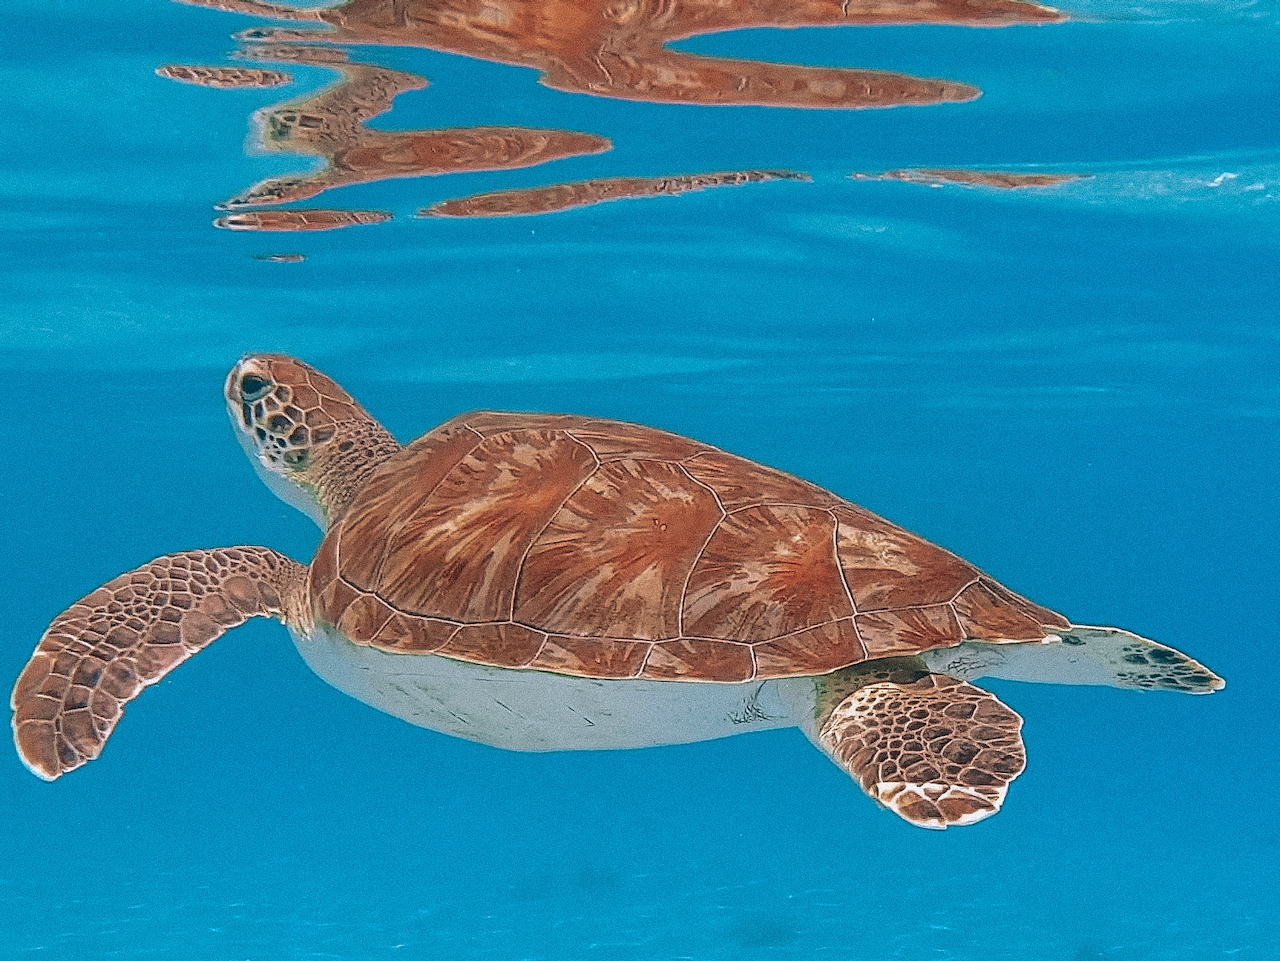 Turtle coming up to the surface to breathe - Grote Knip - Curaçao - ABC Islands